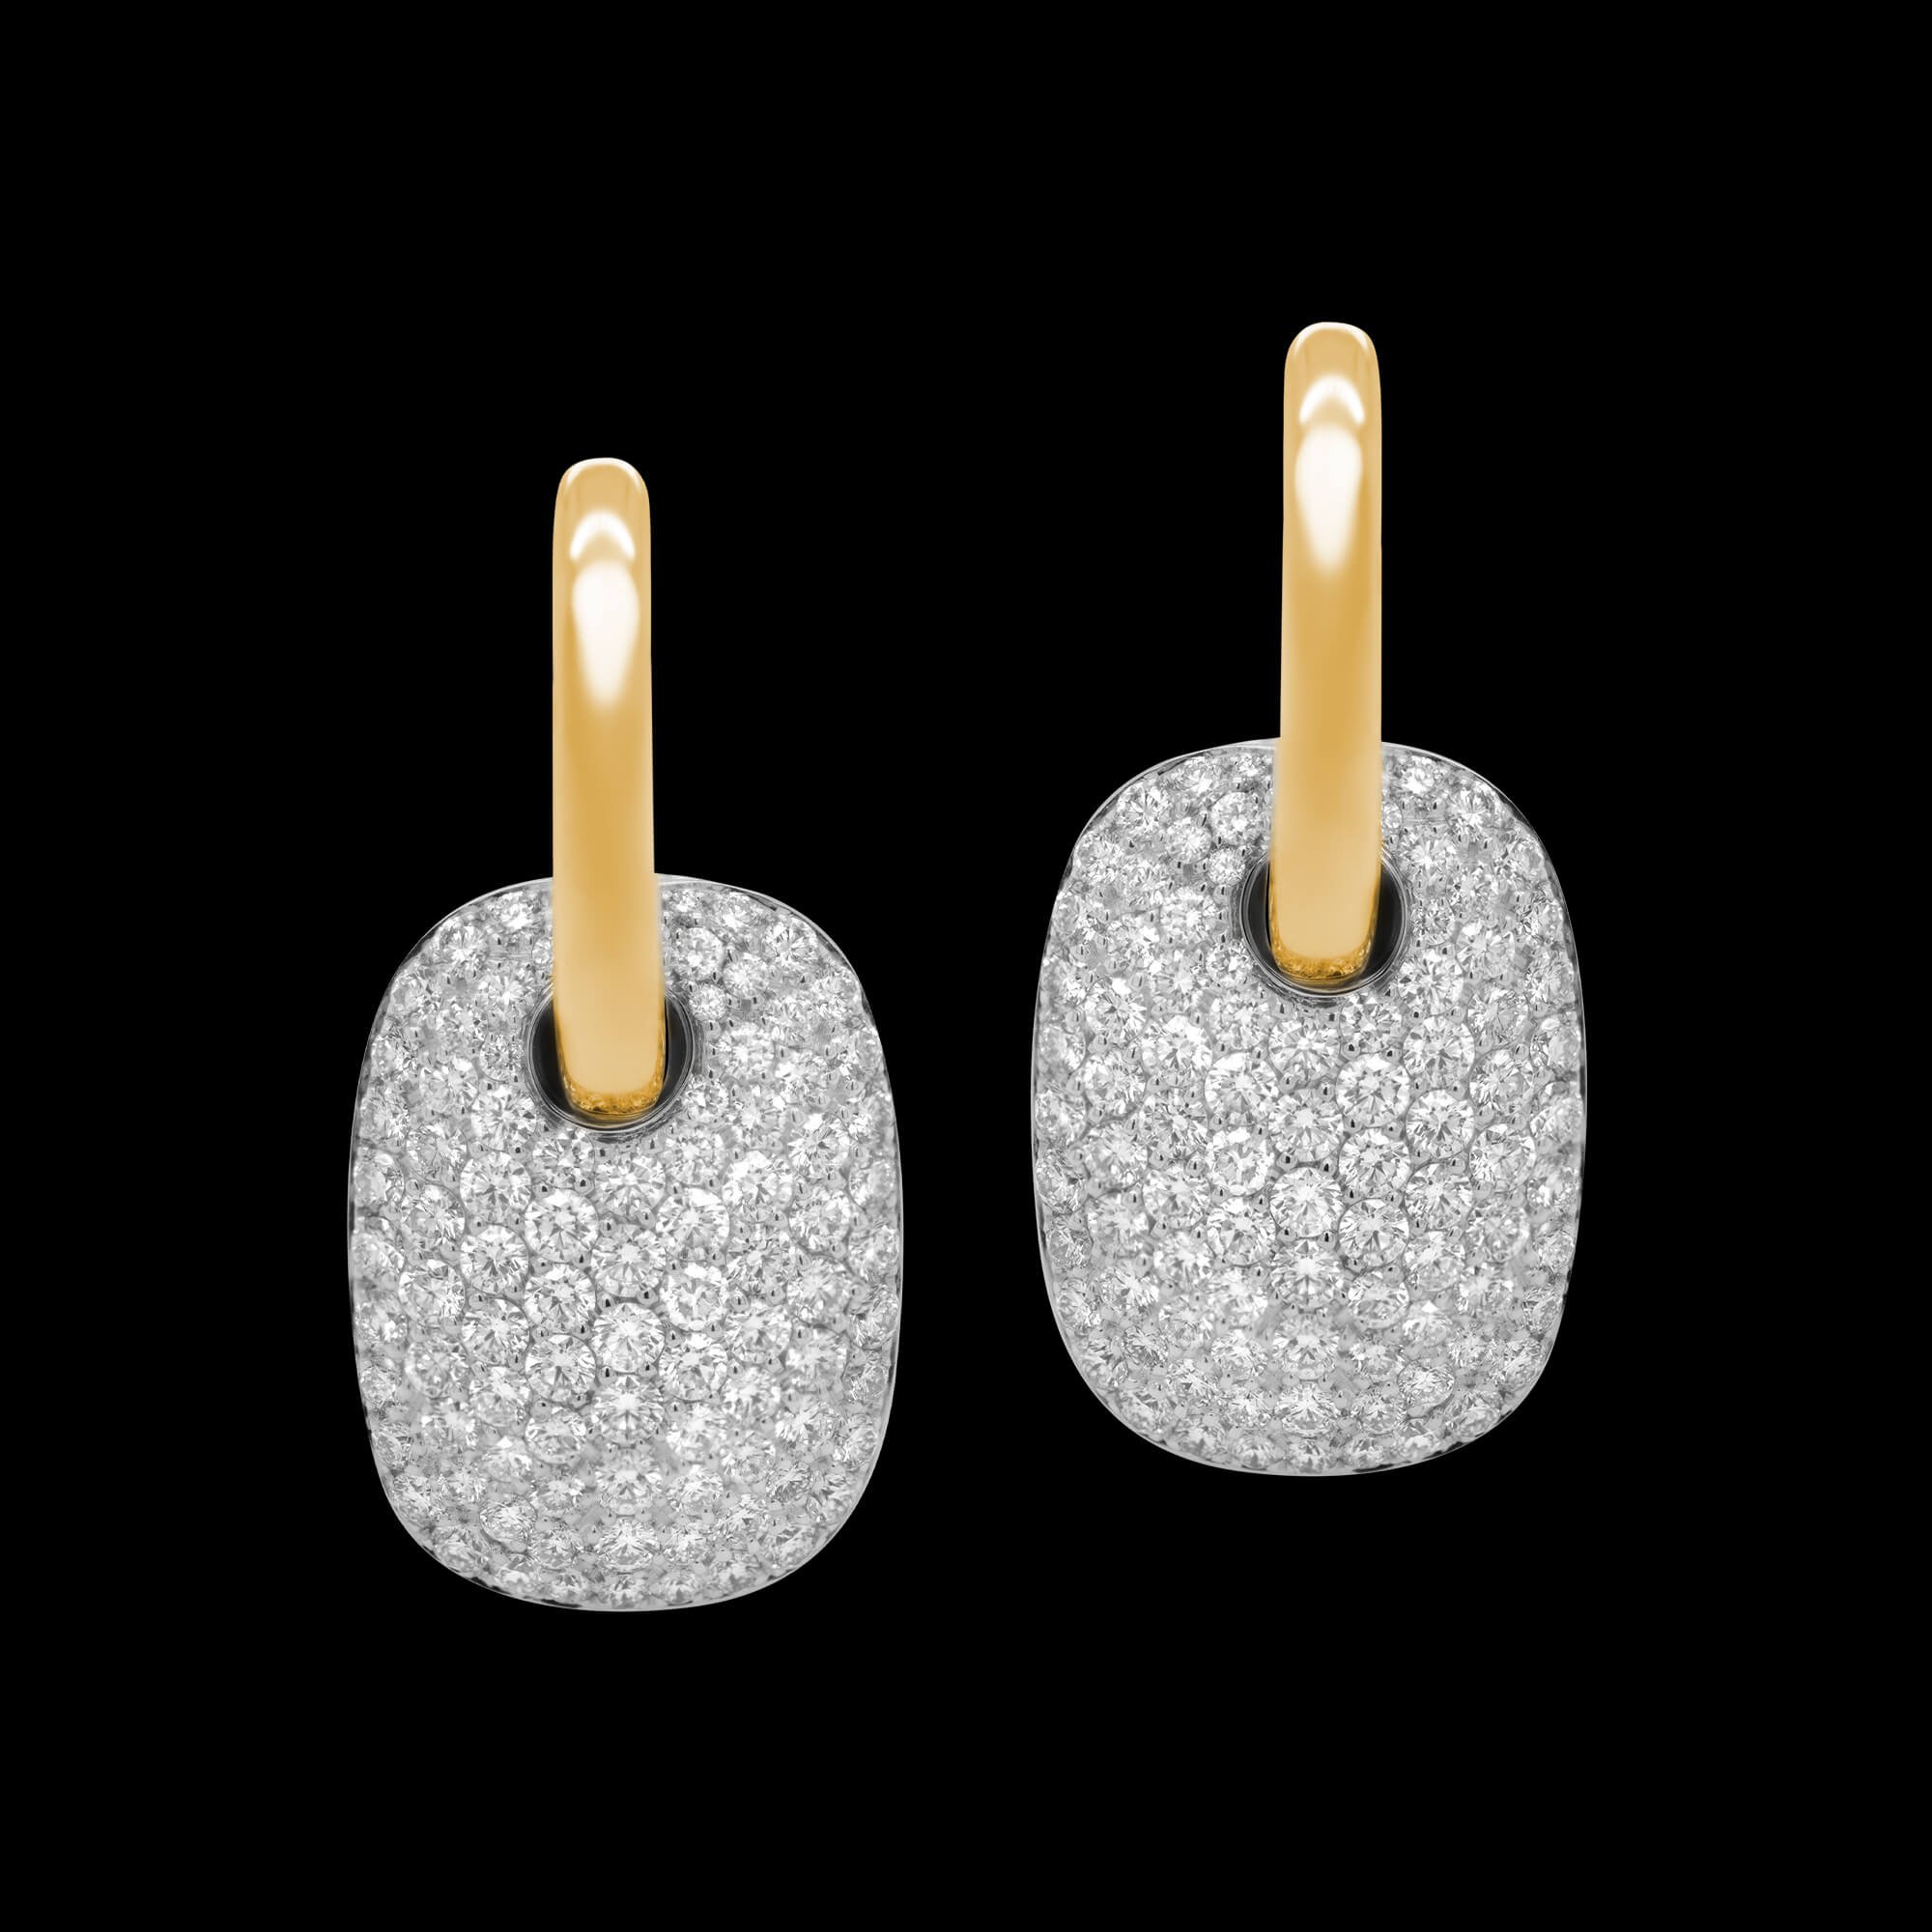 Custom 18kt yellow and white gold tag earrings with pave-set diamonds. FRIDA | Fine Jewellery.jpg